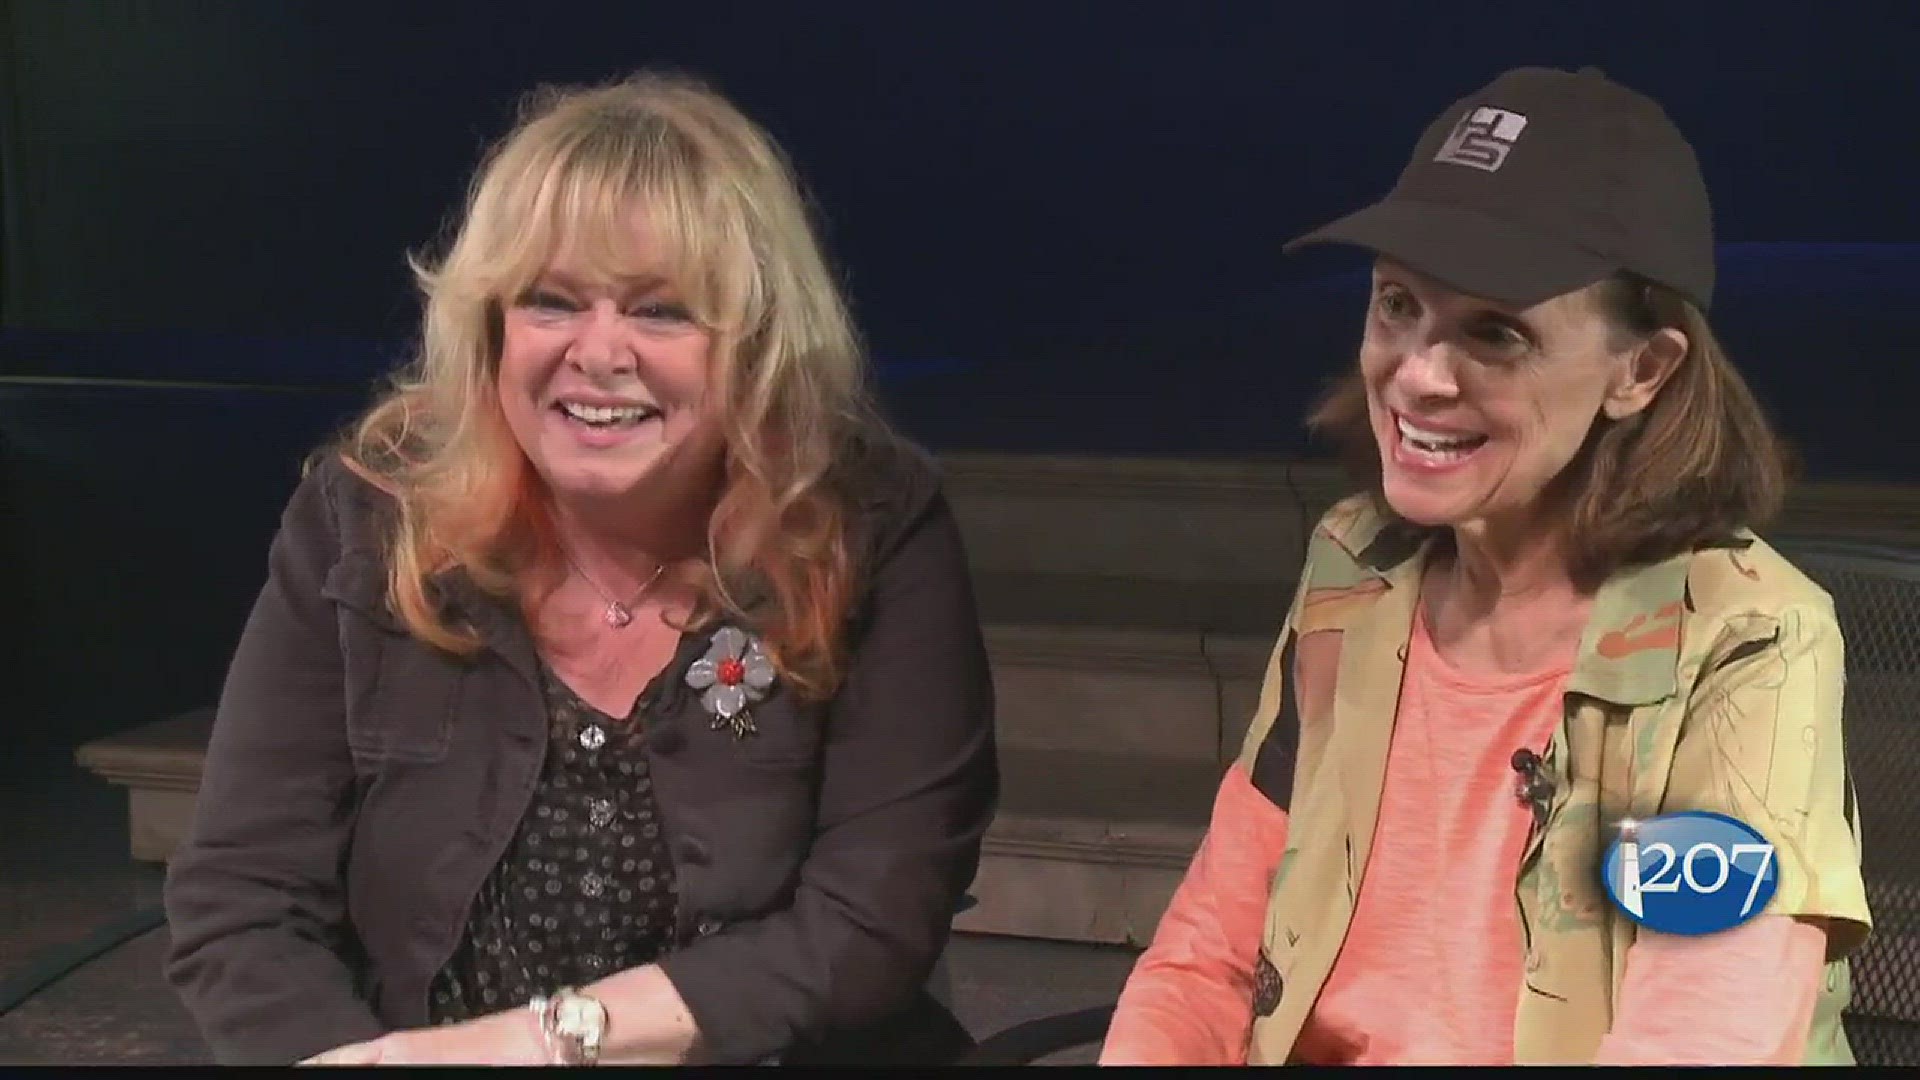 Sally Struthers and Valerie Harper - Ogunquit Playhouse - Part 2